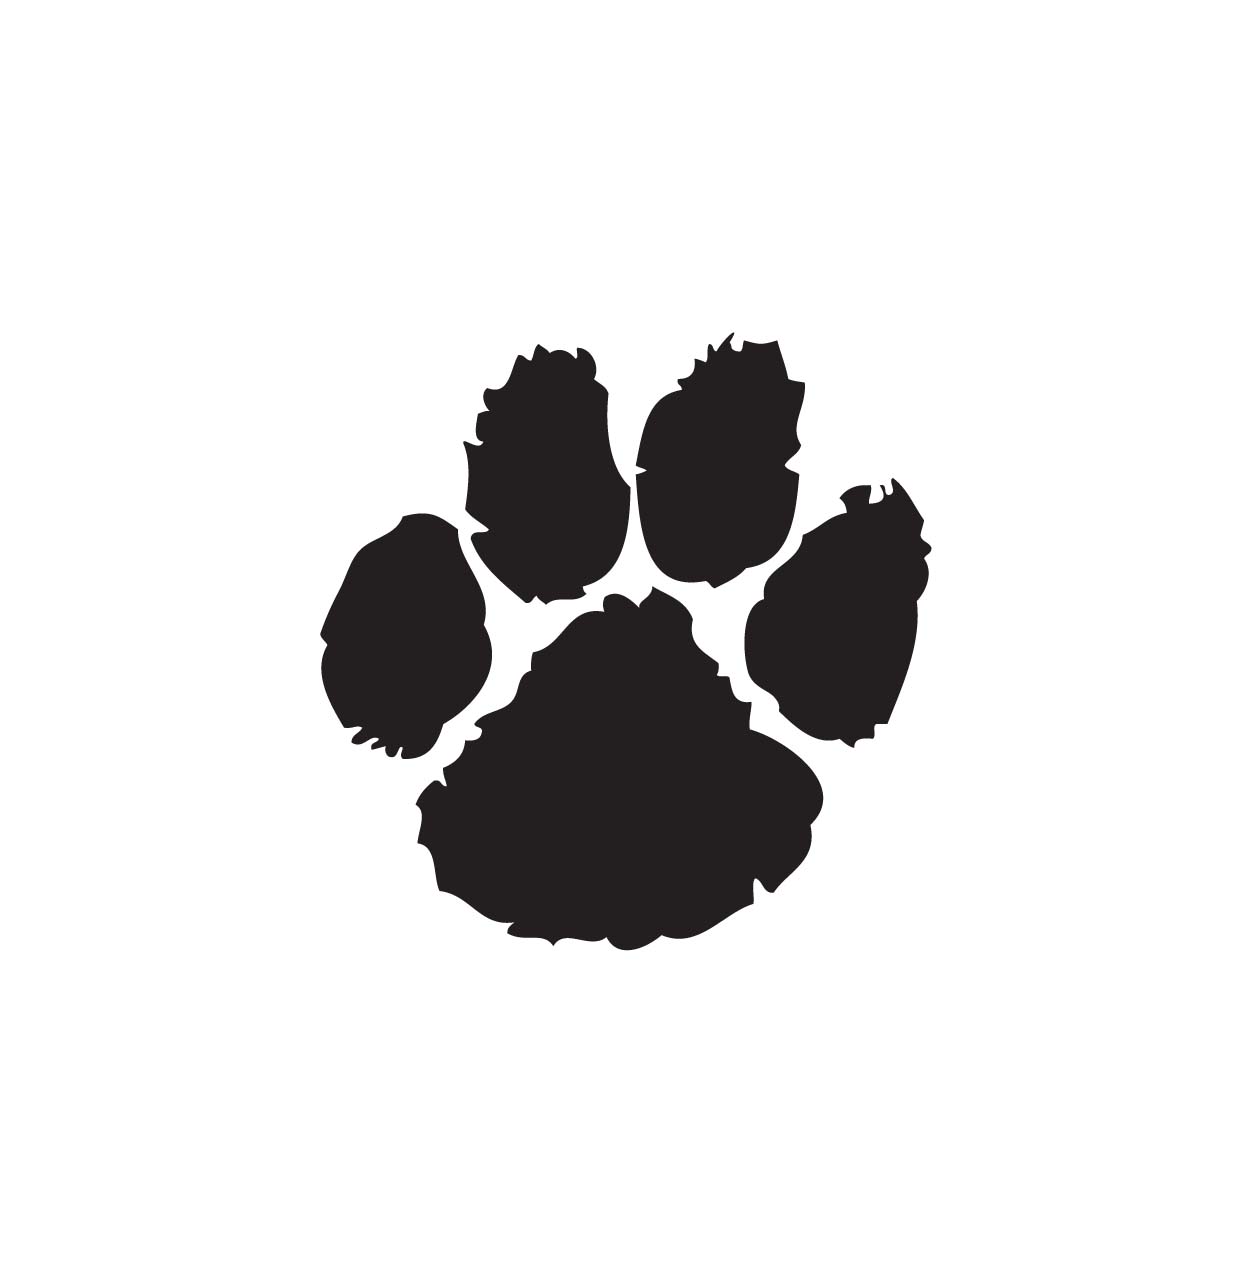 13 Puppy Paw Print Clip Art Free Cliparts That You Can Download To You